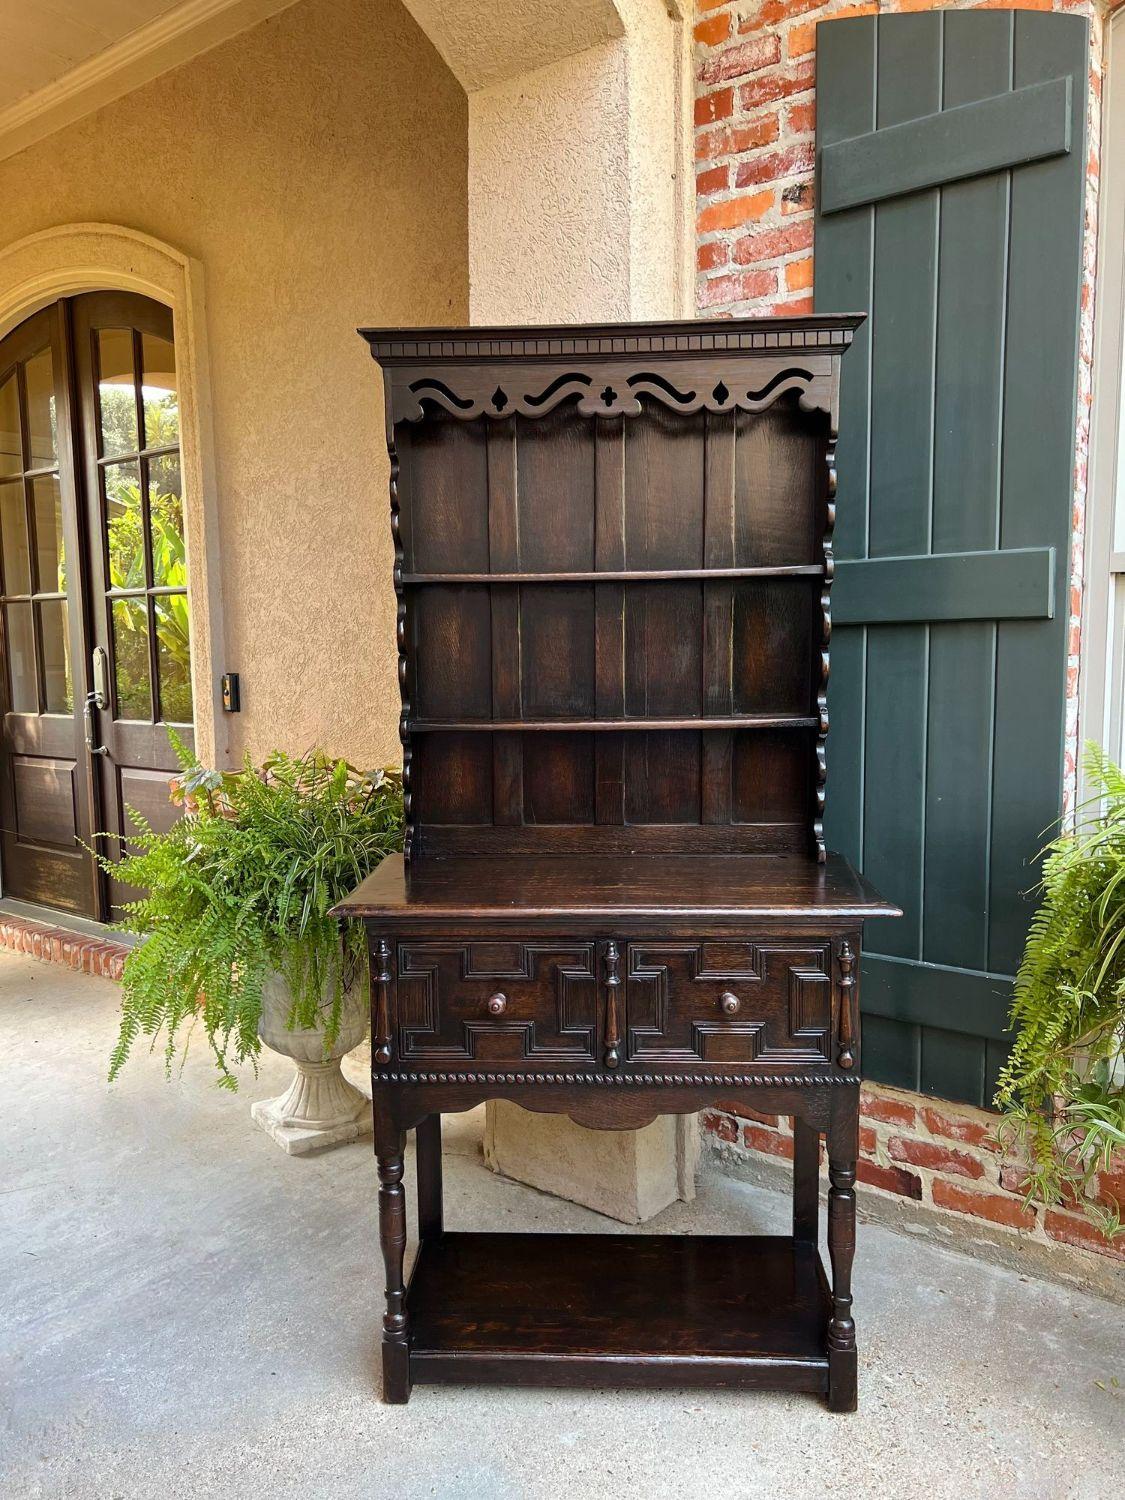 Antique English Welsh Dresser Sideboard Carved Oak Jacobean Farmhouse Cabinet.

Direct from England, a charming antique English “Welsh Dresser” or sideboard, ALWAYS a classic that blends perfectly with every style, and provides an abundance of